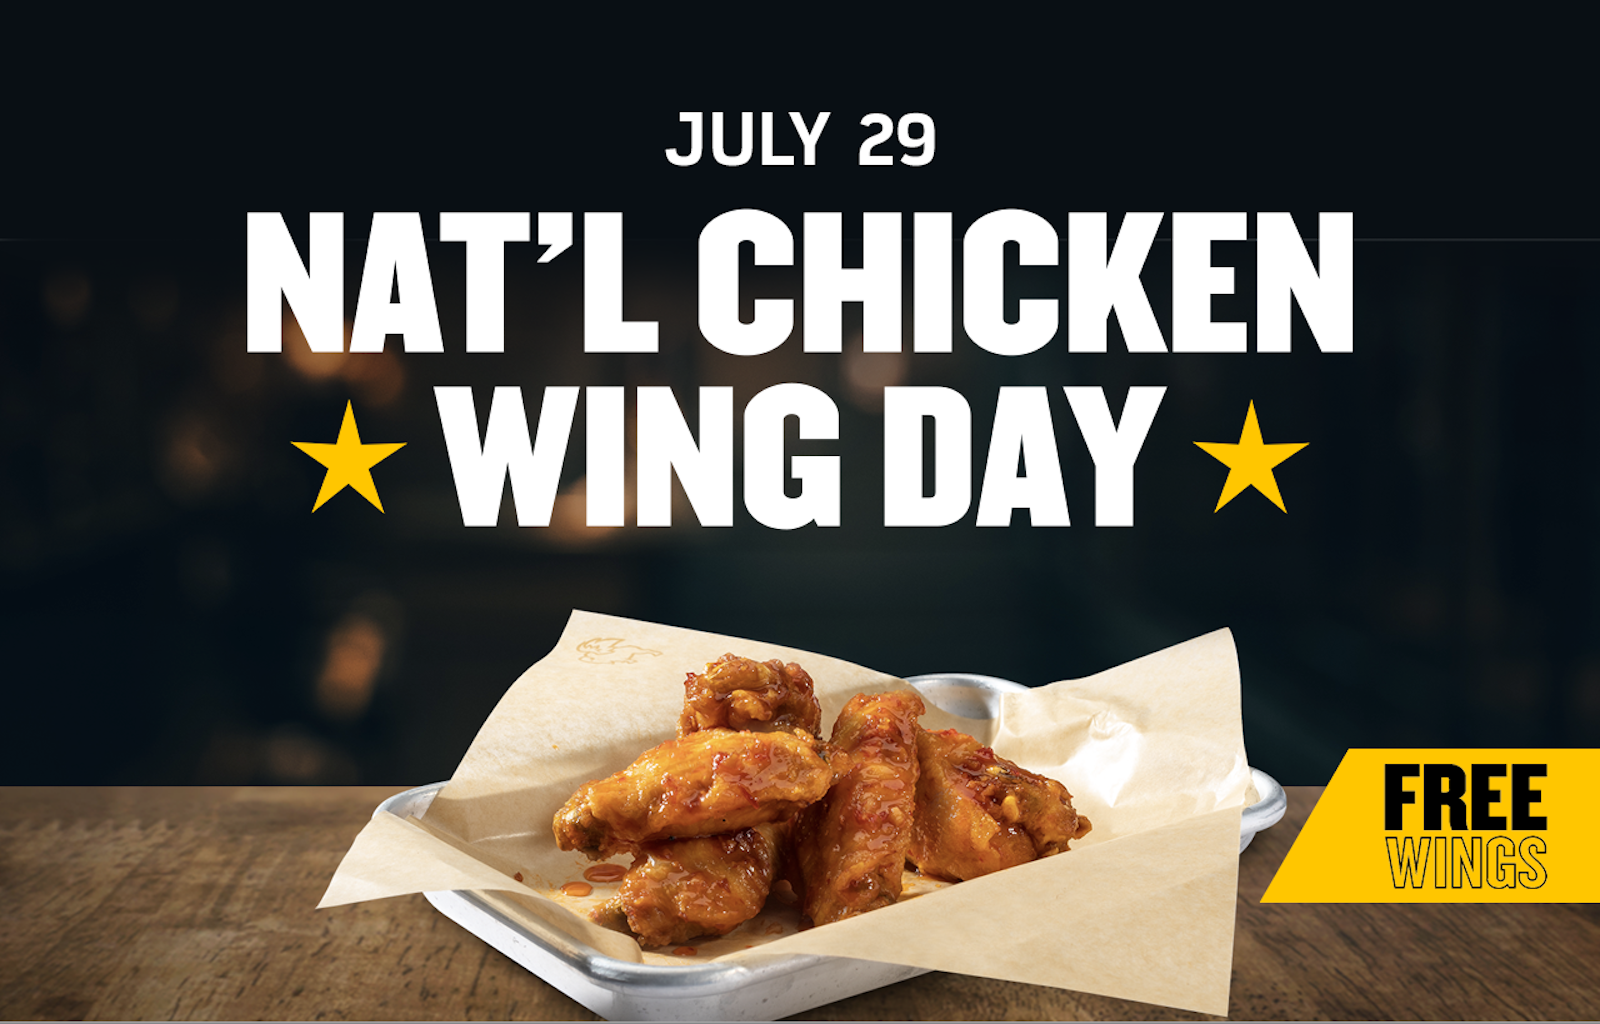 underordnet marxisme Stratford på Avon Fans Can Score Free Wings with Wing Purchase at BWW on National Wing Day